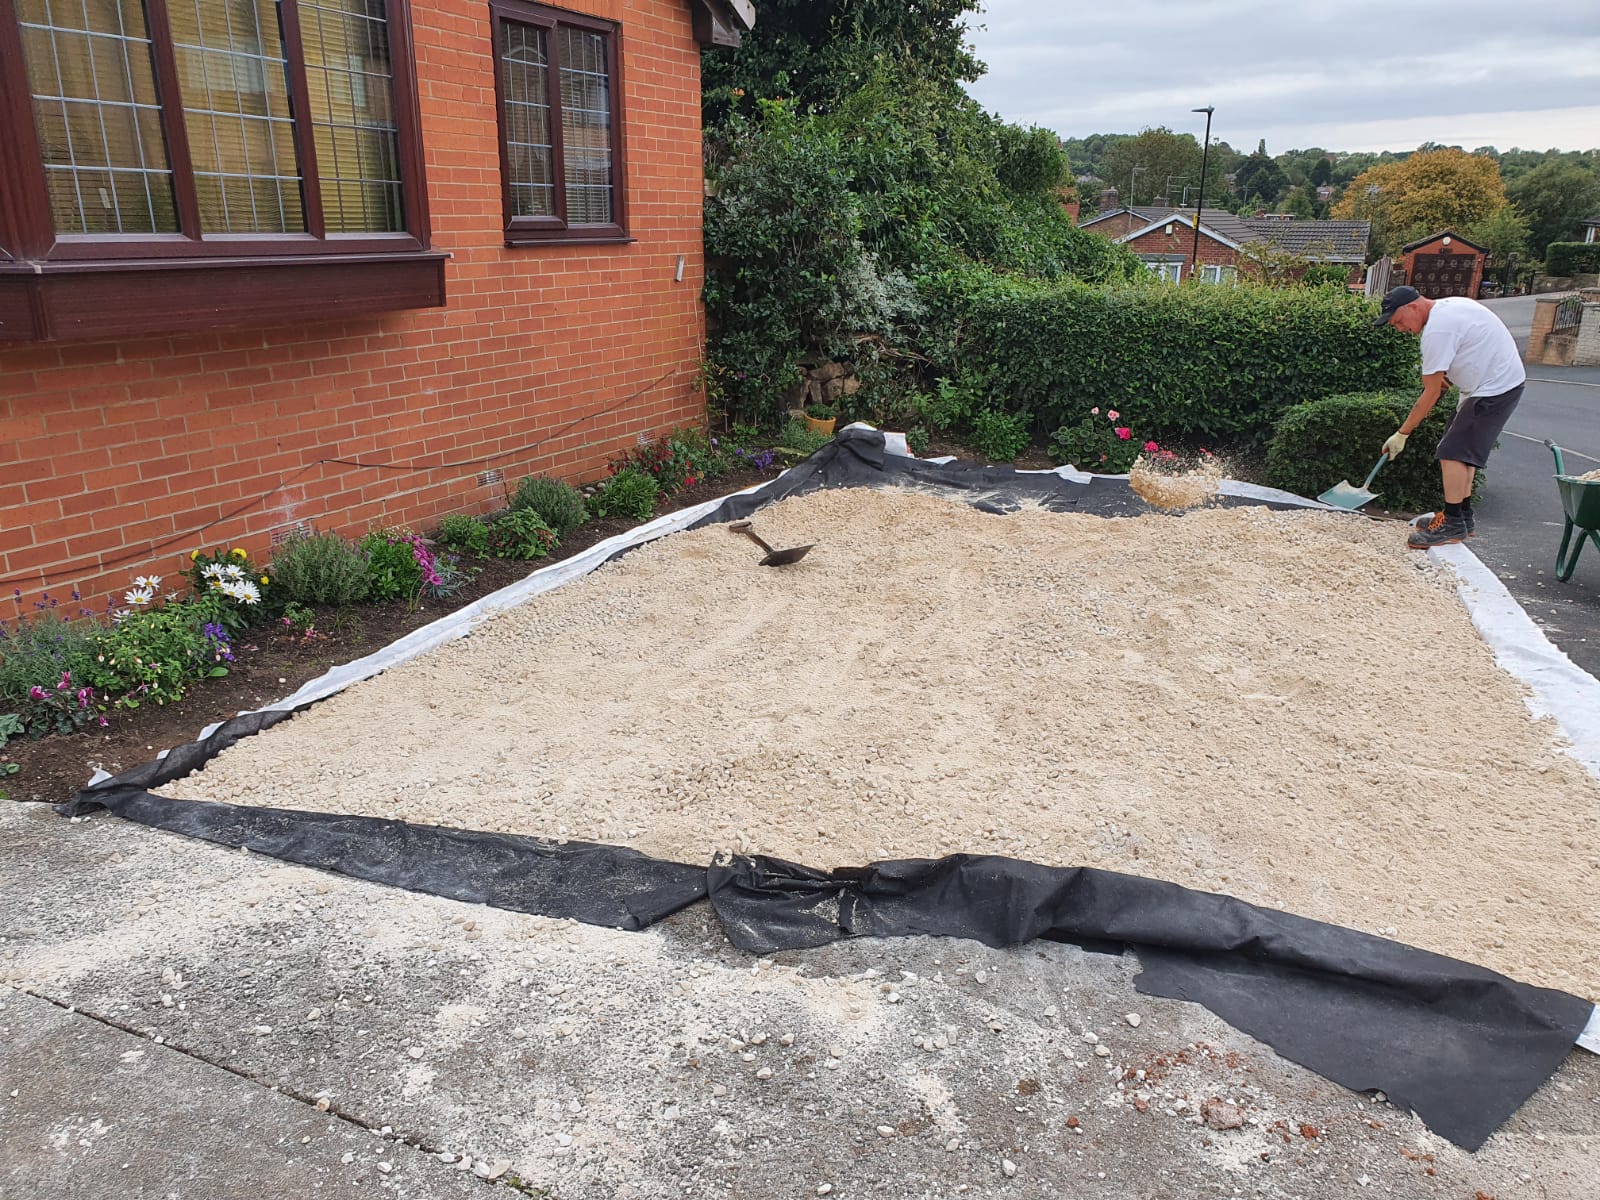 Weed membrane and aggregate put down ready for artificial grass for Handsworth Sheffield front garden